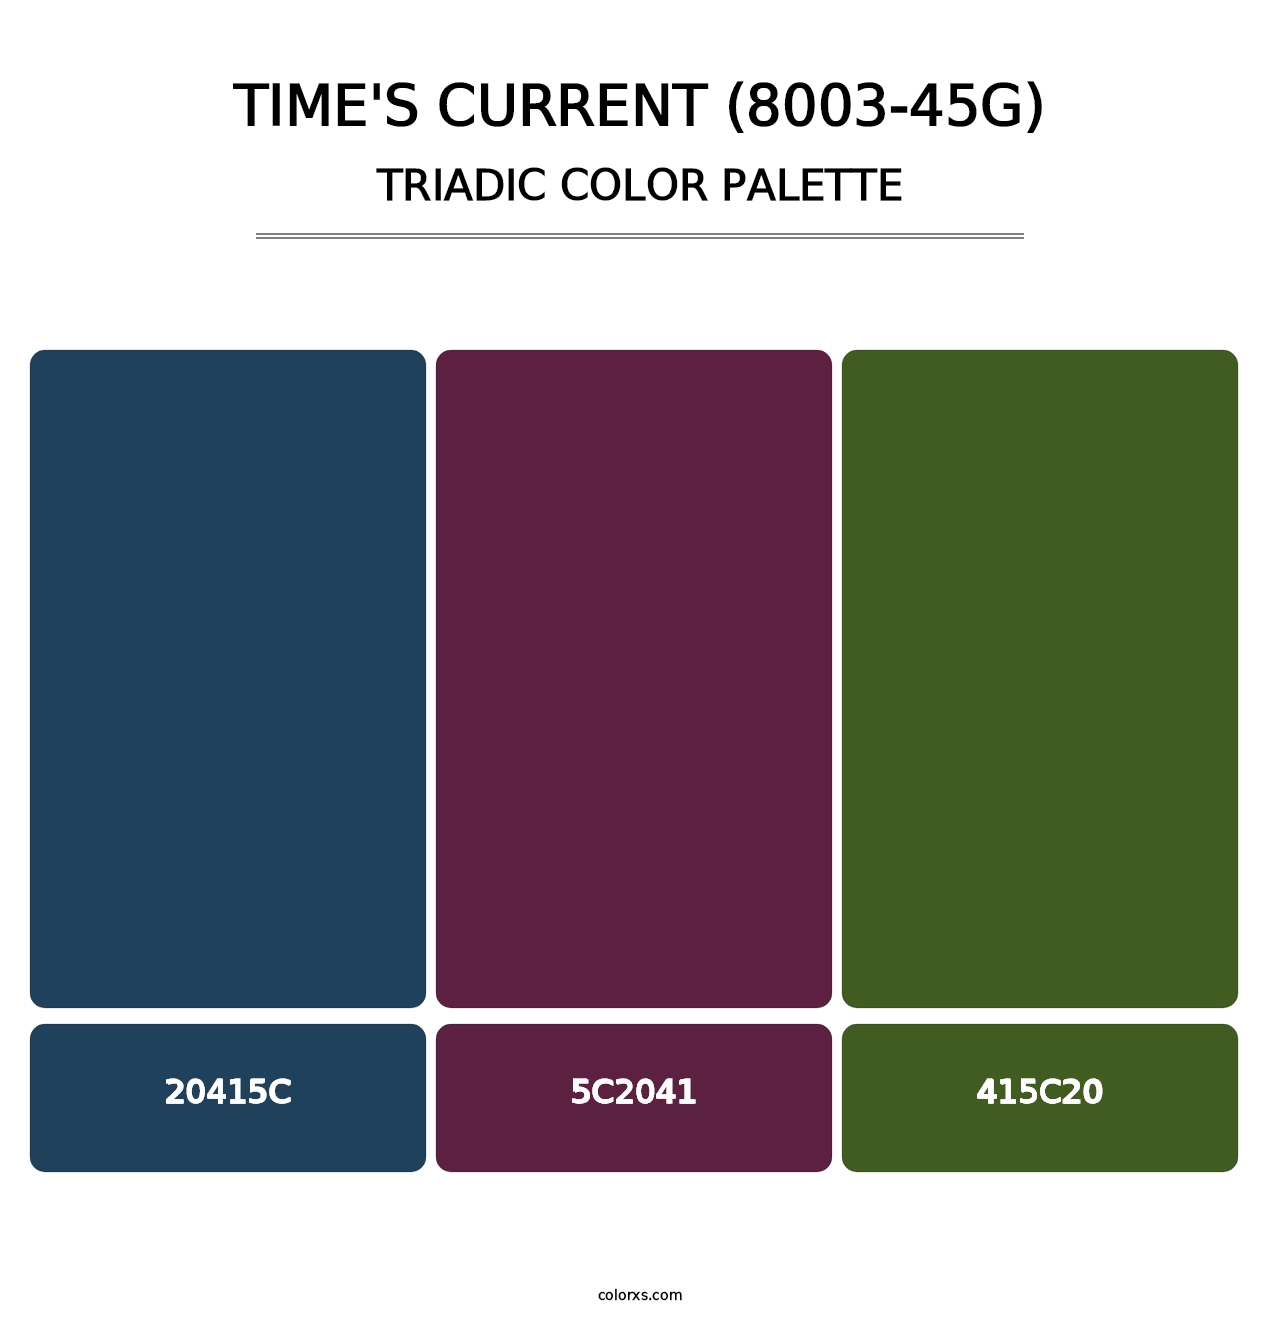 Time's Current (8003-45G) - Triadic Color Palette